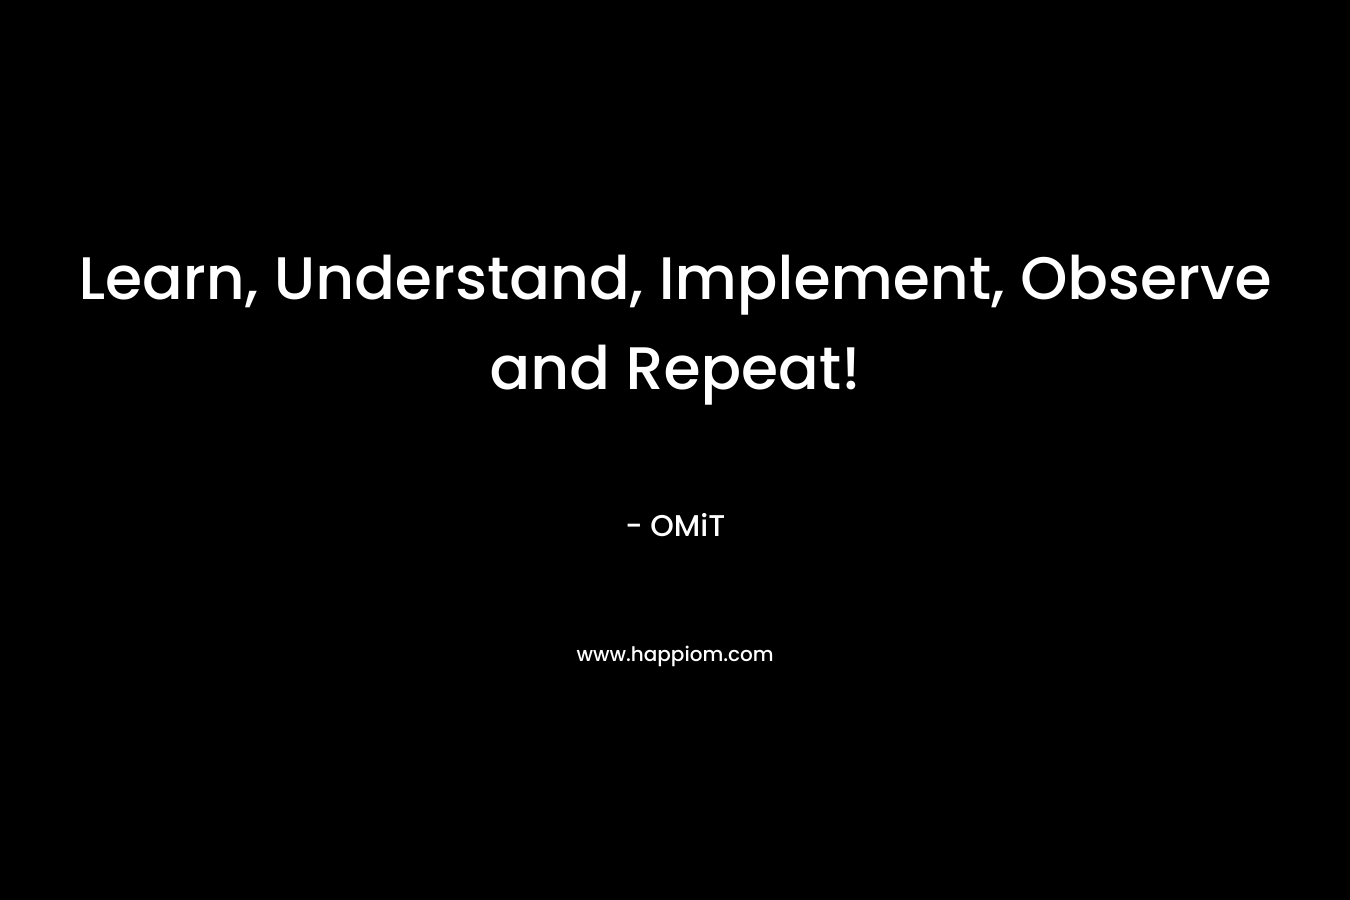 Learn, Understand, Implement, Observe and Repeat! – OMiT